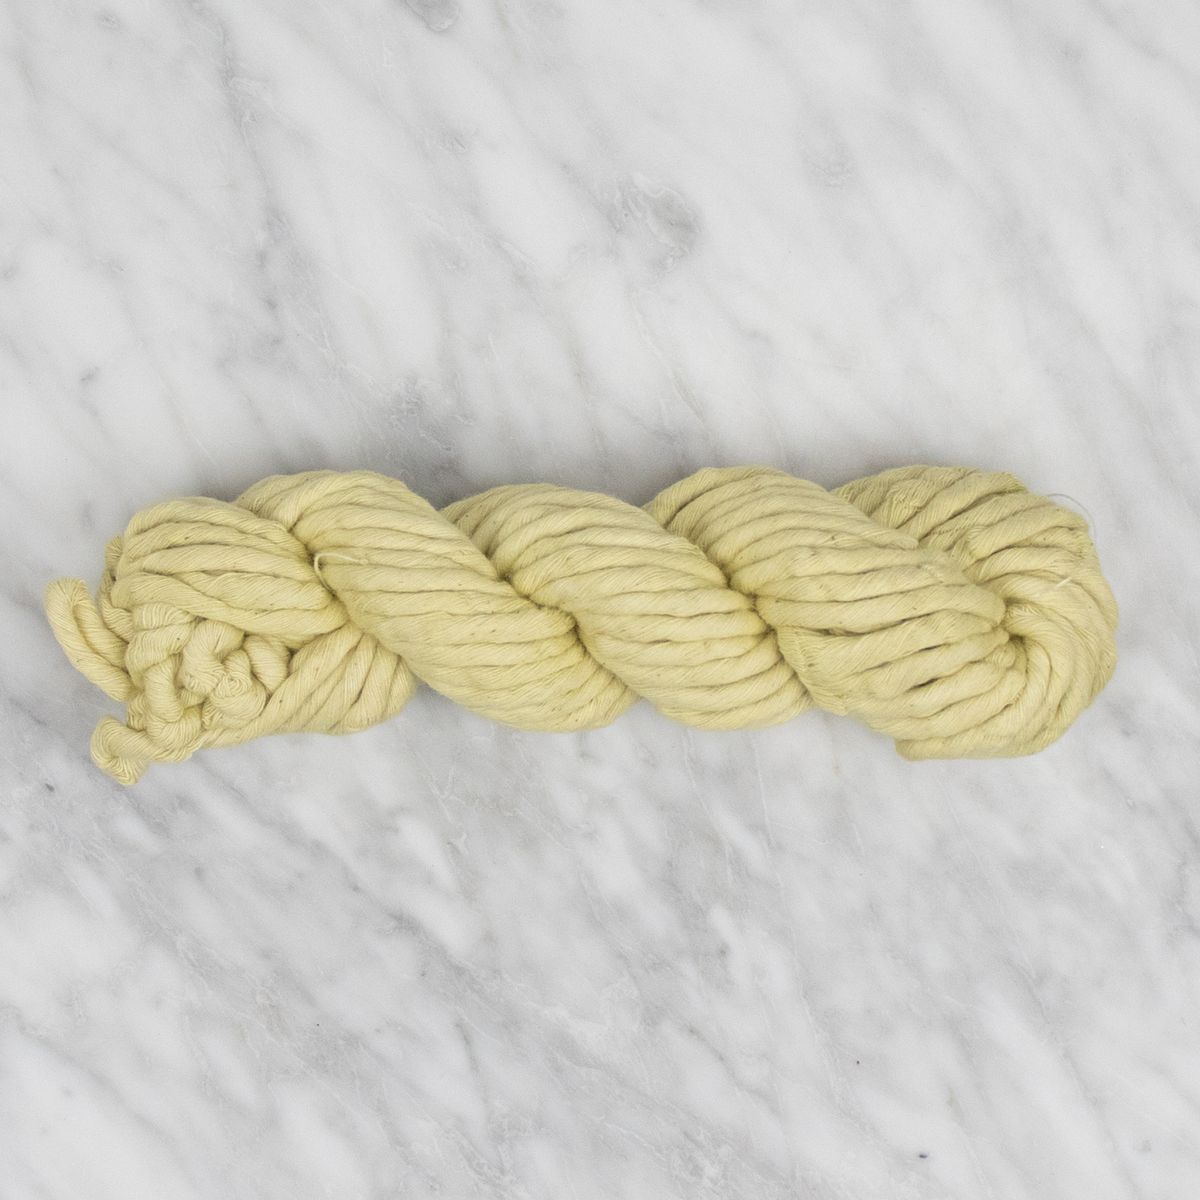 5mm Hand-Dyed Cotton String - Illuminating - 100 grams